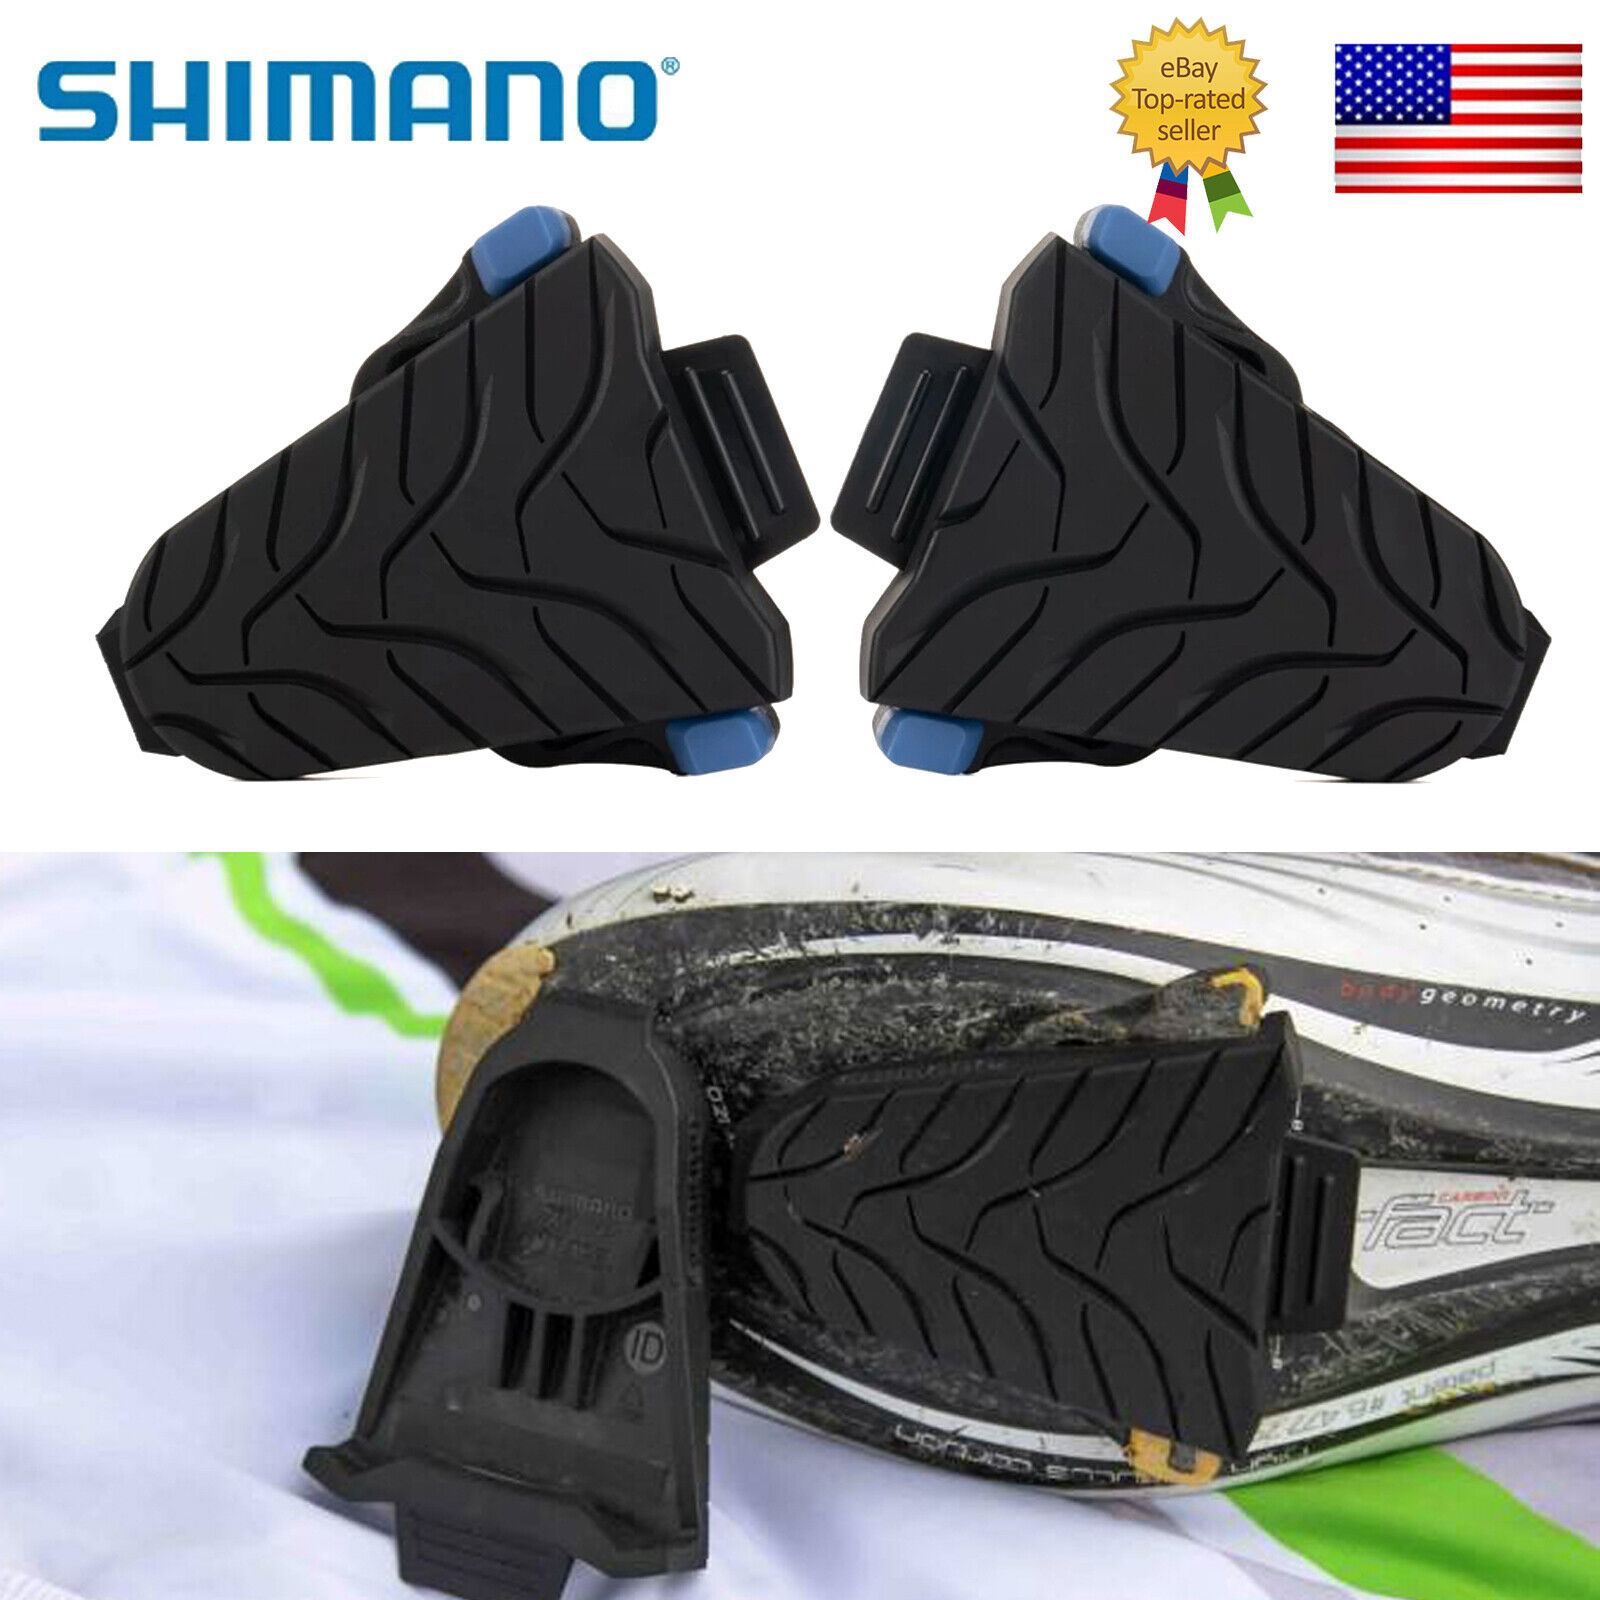 Shimano SM-SH45 Cleat Covers Shoe Cover SPD-SL Road Bike Pedal Protector Genuine